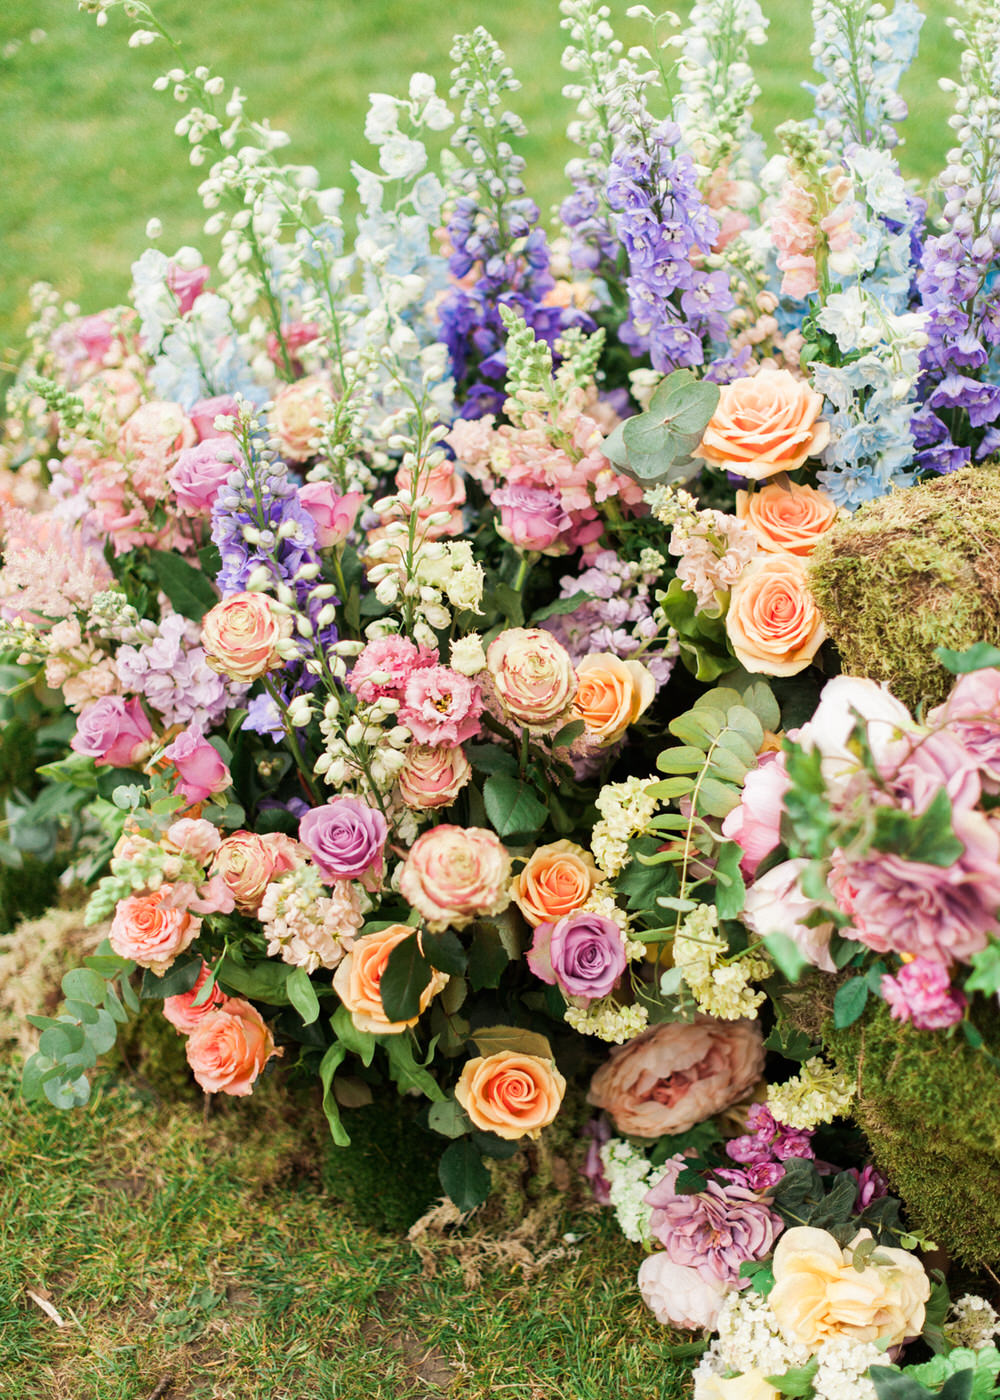 Floral Centrepieces | Peach, Pink and Purple Flowers | A Midsummer nights dream inspired children's birthday party with stunning floral, fairy entertainment, crafts and a picnic. Photos by Kate Nielen.